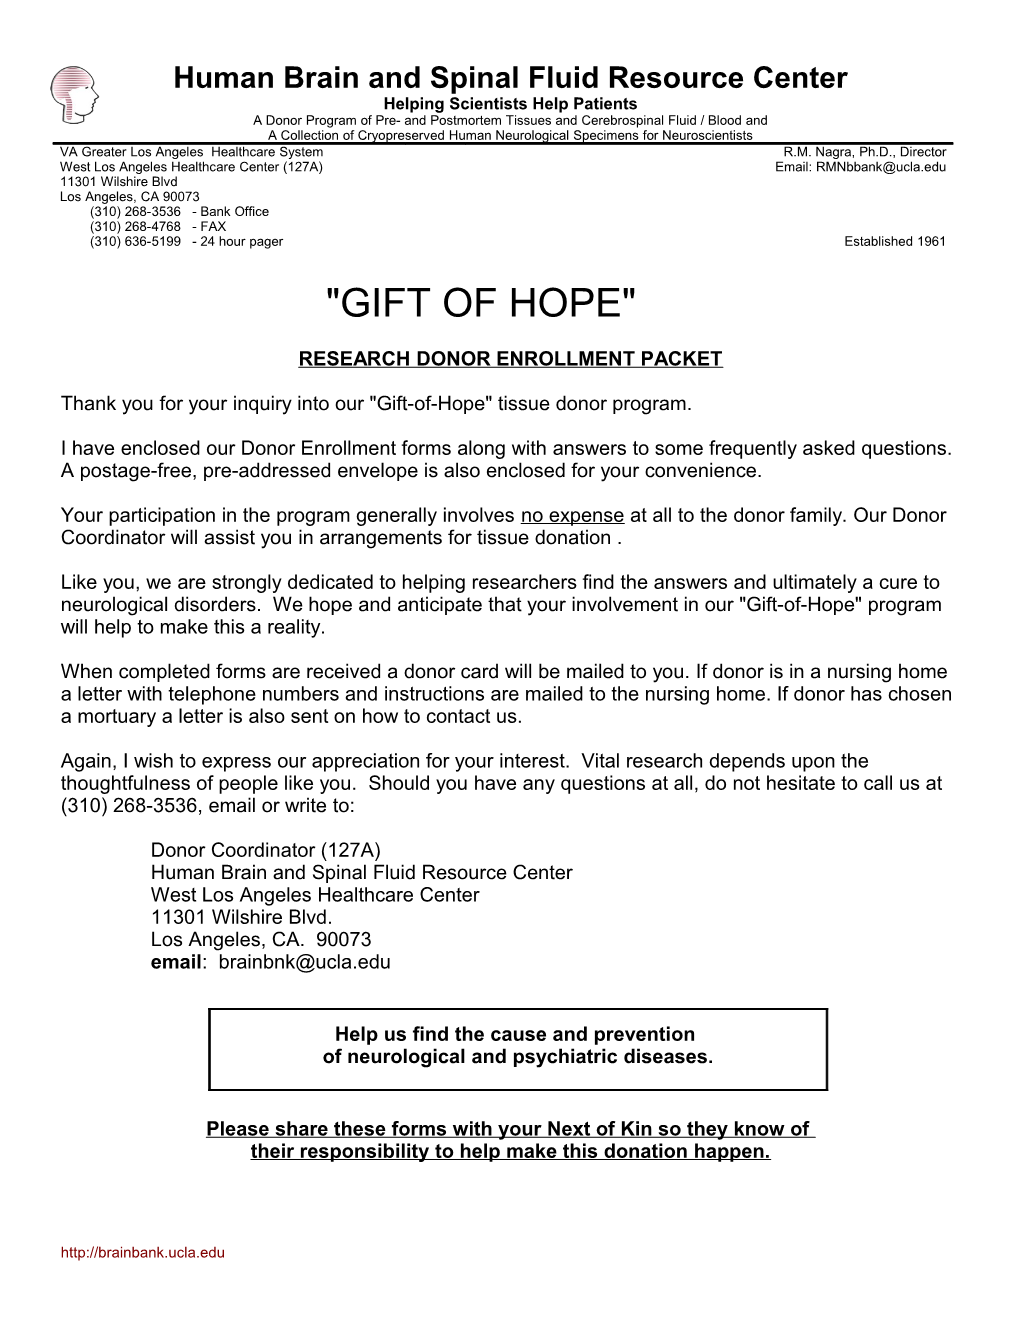 Human Brain and Spinal Fluid Resource Center Gift of Hope Program